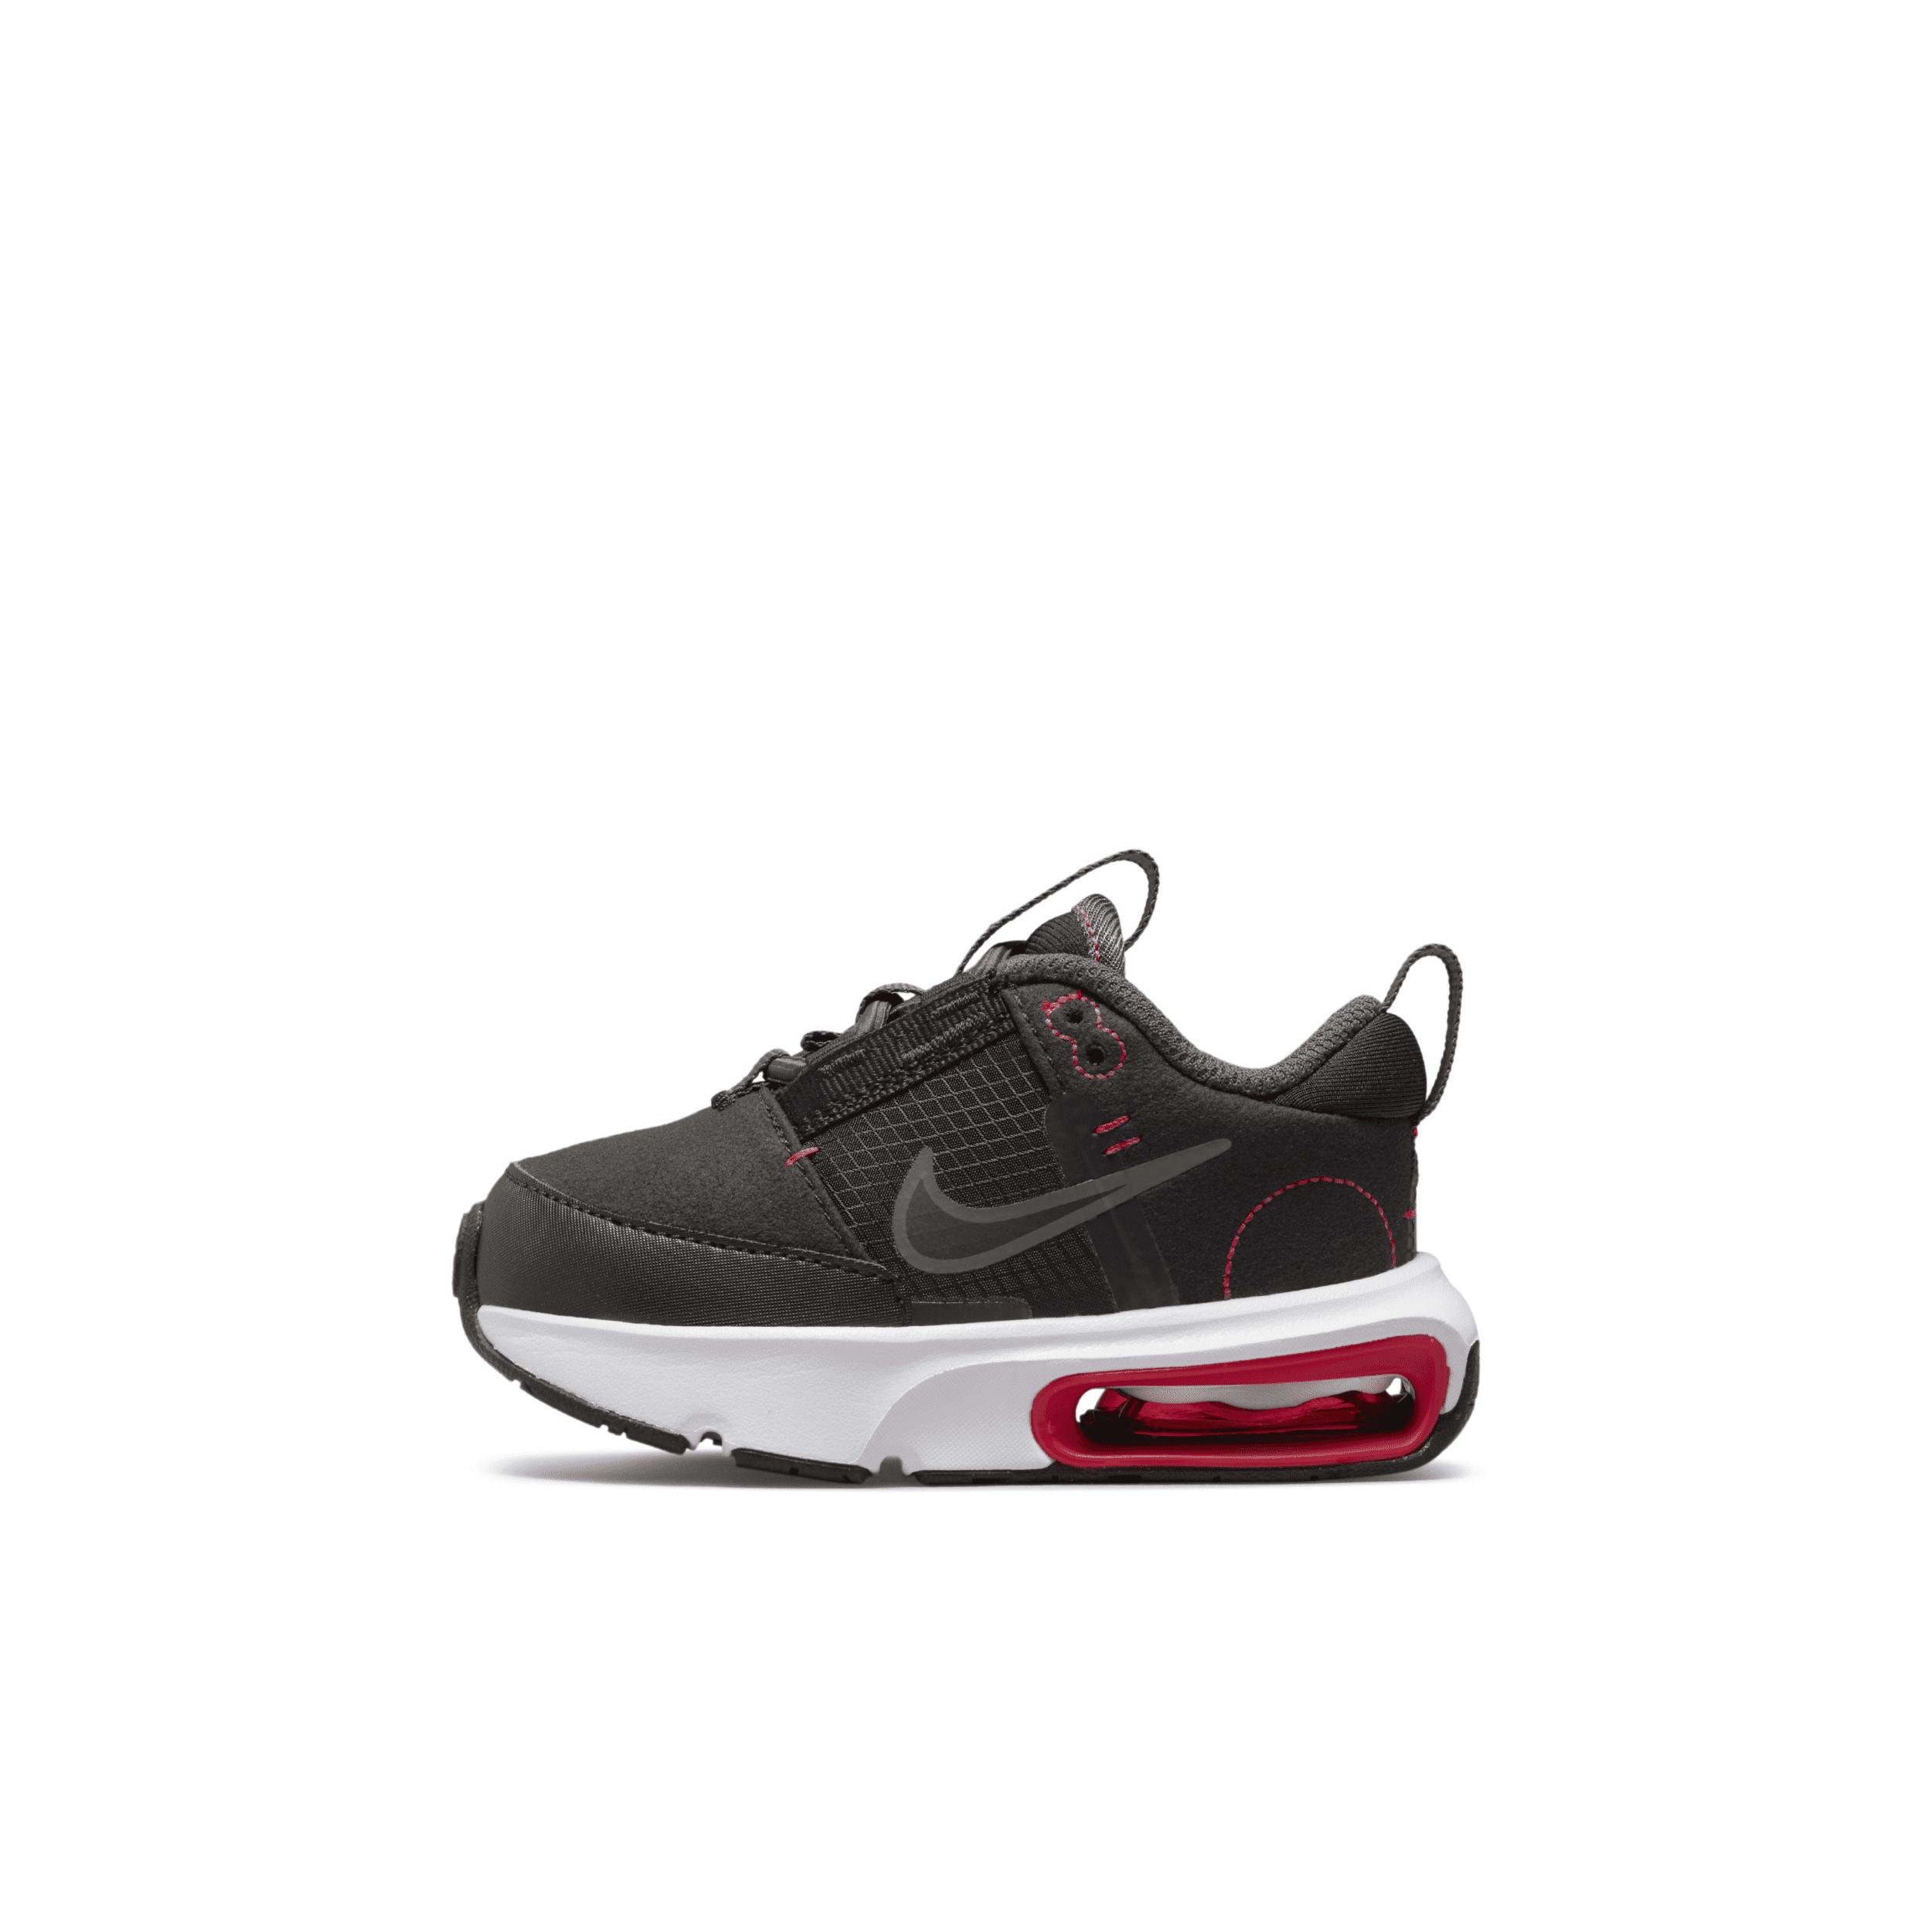 Nike Air Max INTRLK Baby/Toddler Shoes by NIKE